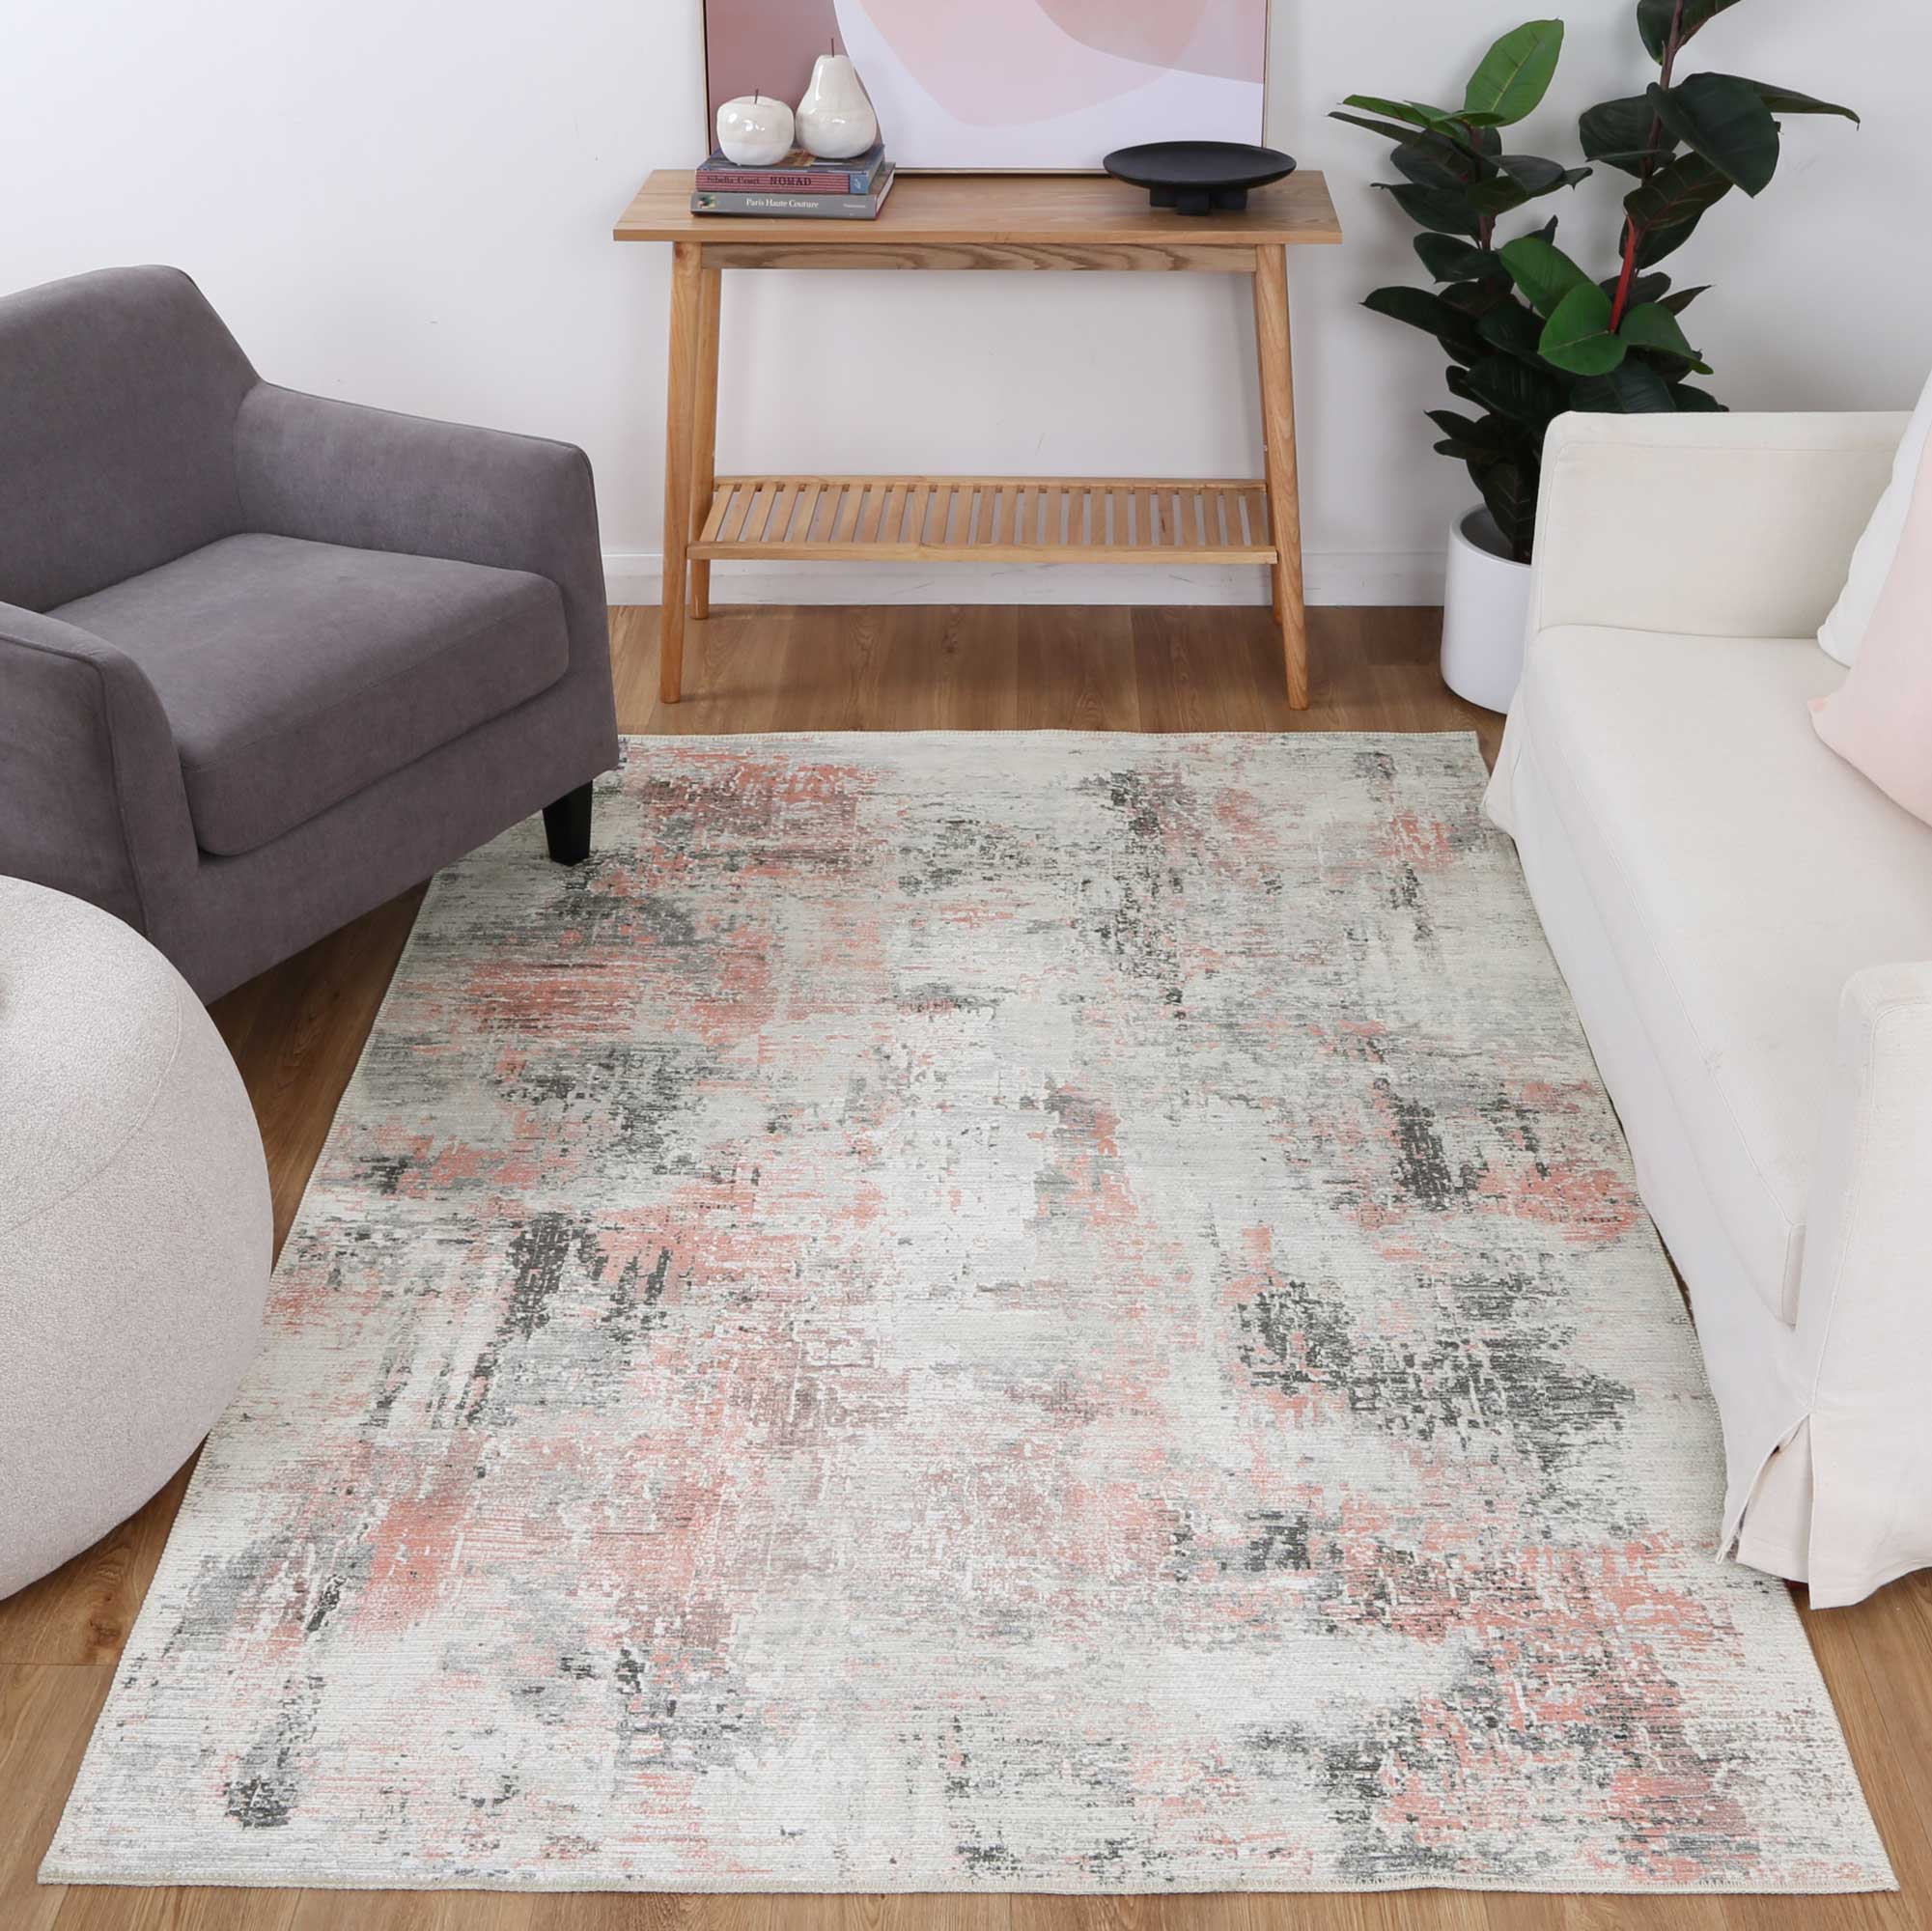 Abstract Celine Blush Rug in living room